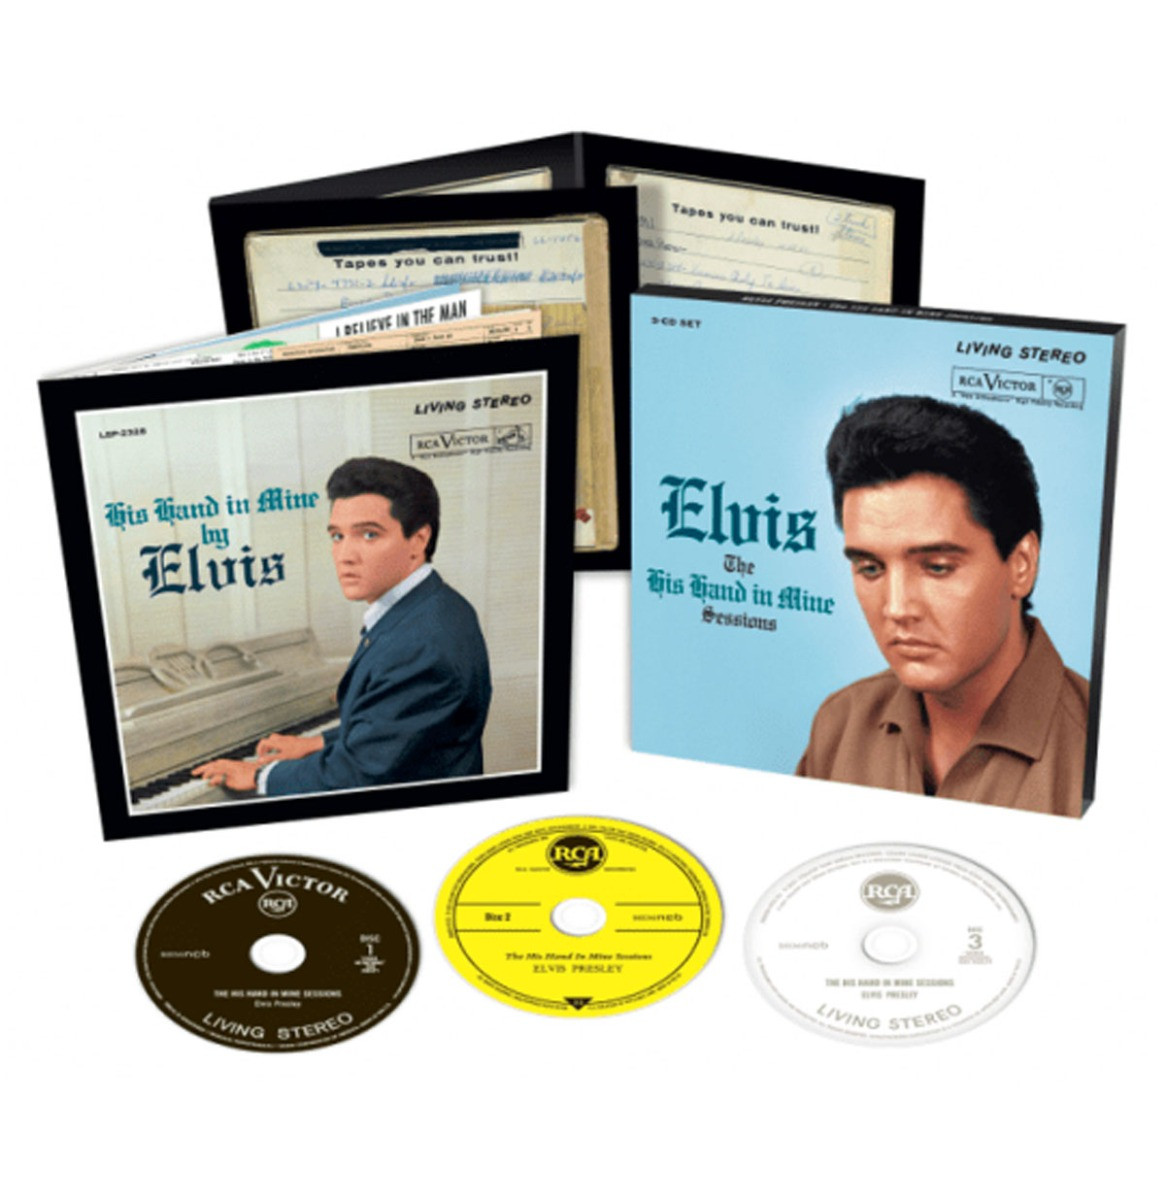 Elvis Presley - The His Hand In Mine Sessions 3-CD FTD-Label